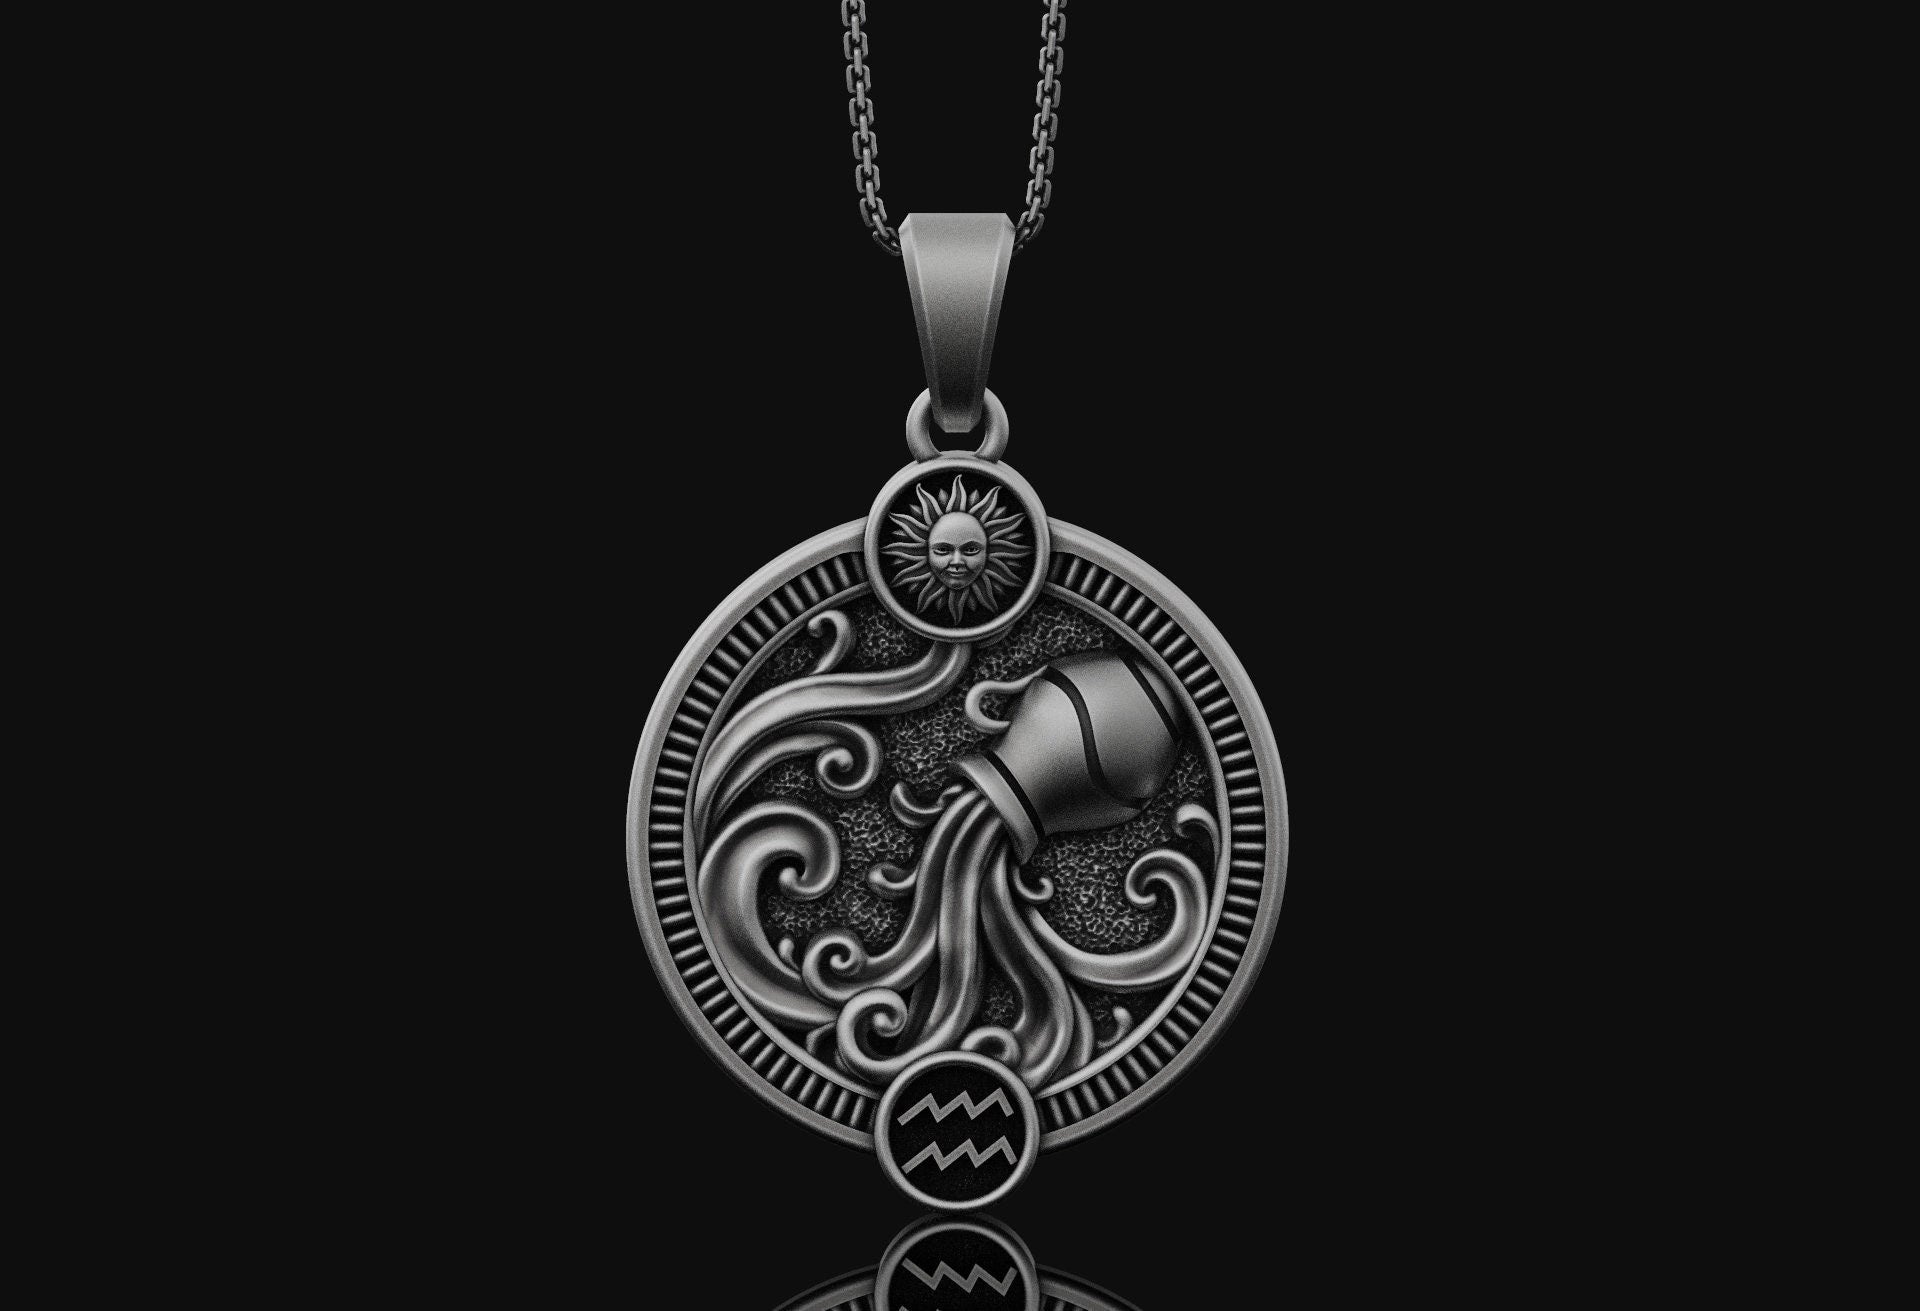 Aquarius Handmade Sterling Silver Necklace Oxidized Finish